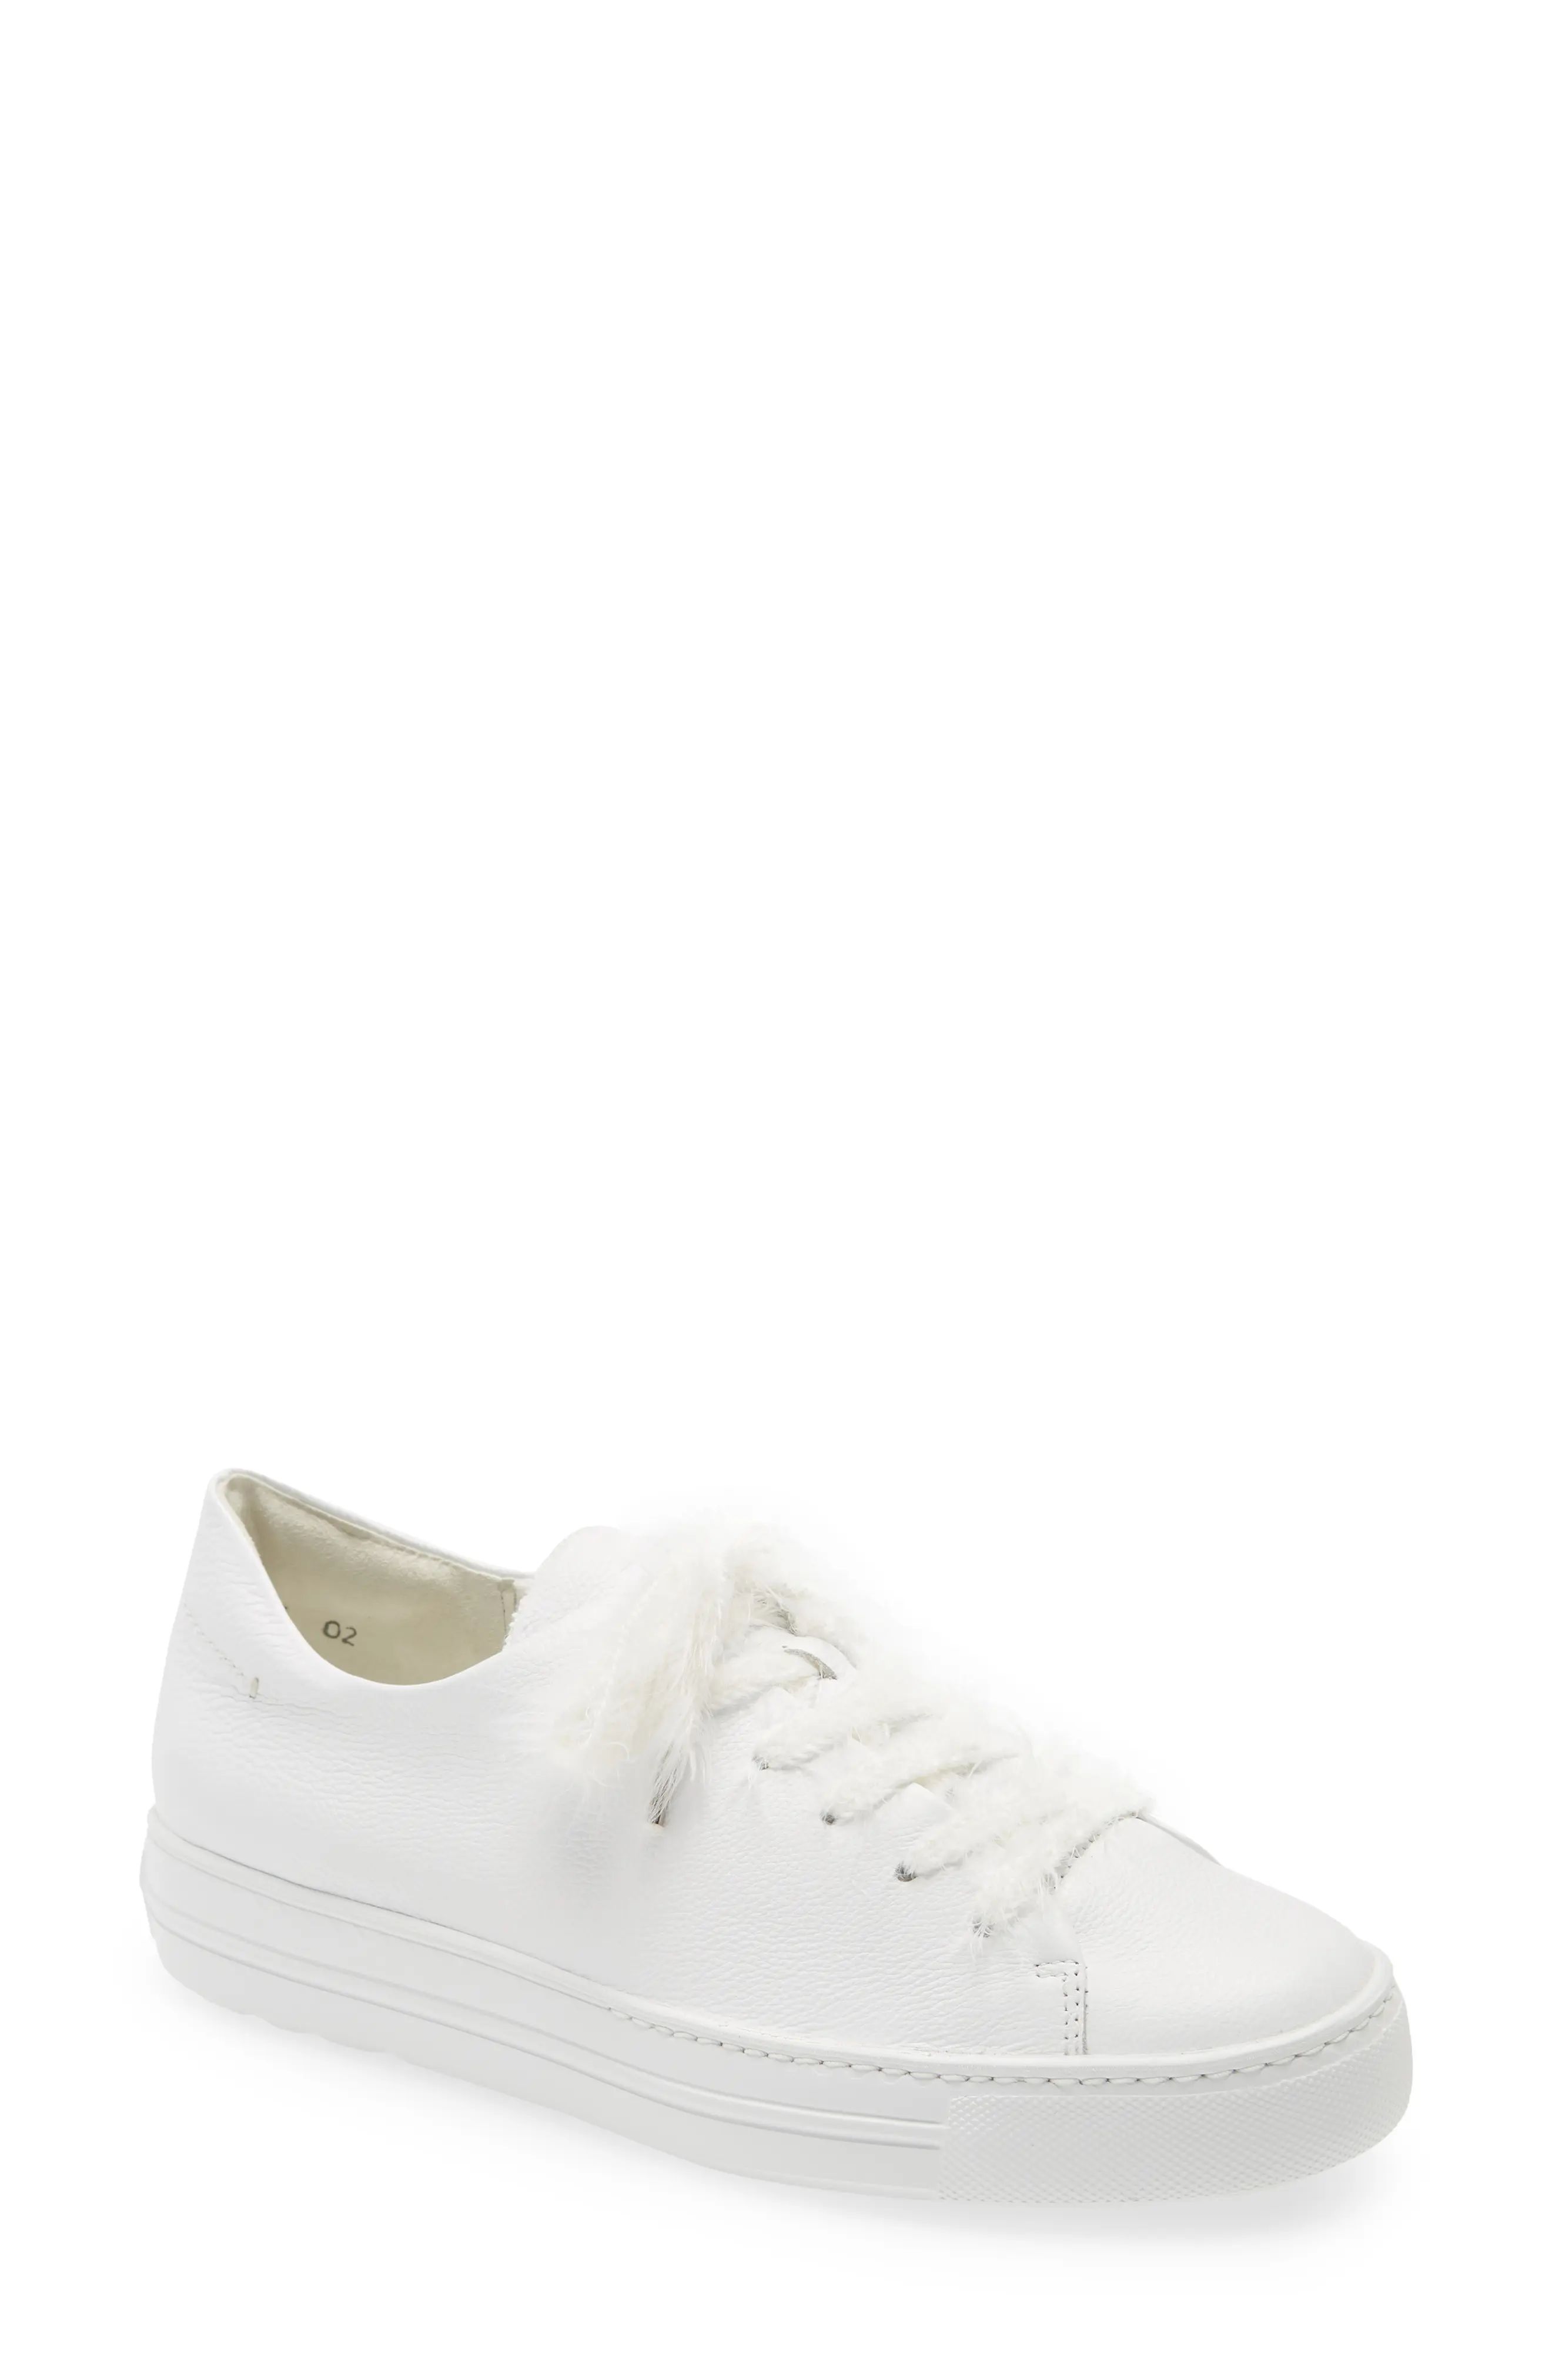 Paul Green Jayden Low Top Sneaker in White Mc Leather at Nordstrom, Size 5.5Us | Nordstrom